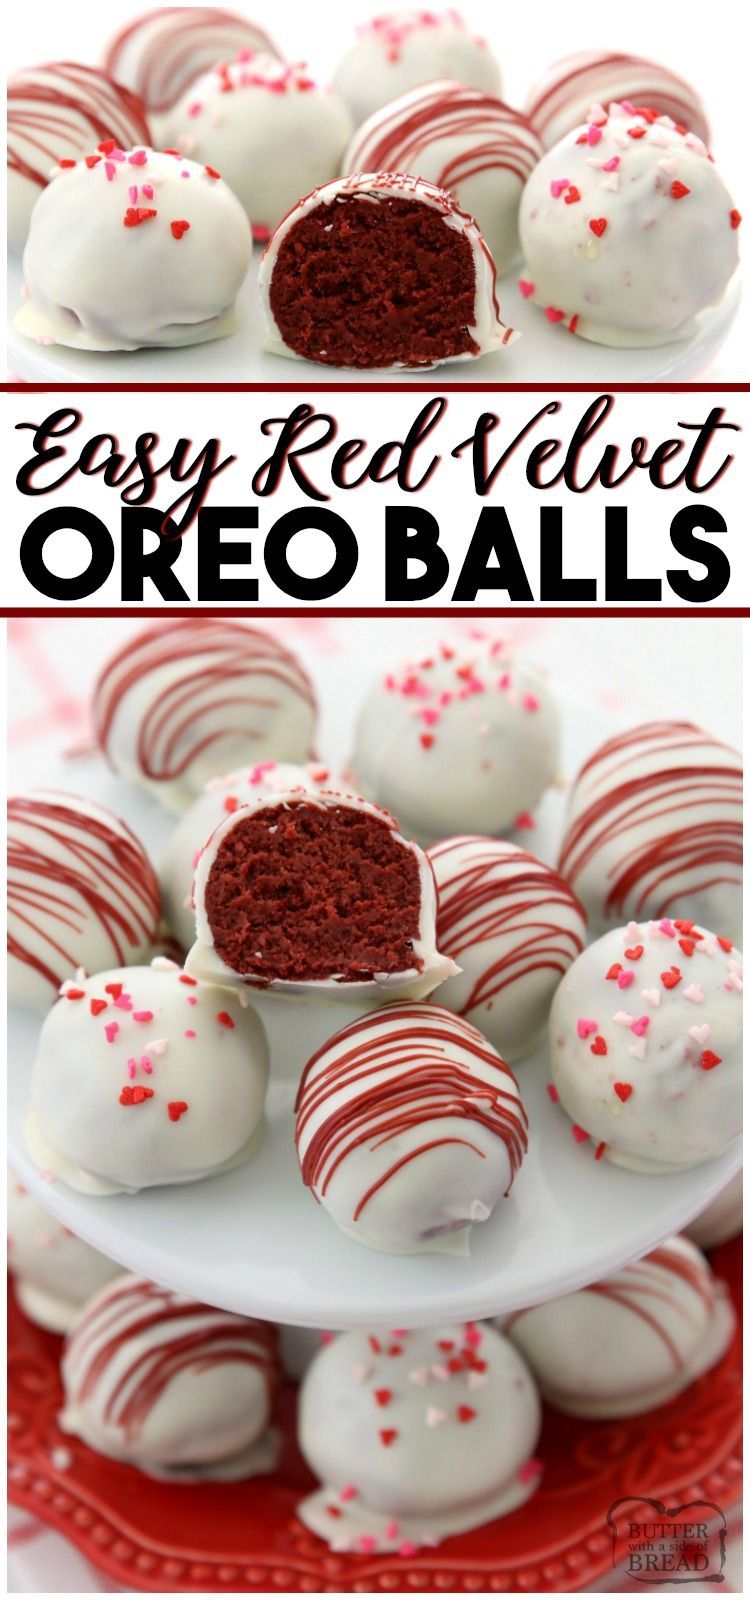 RED VELVET OREO BALLS - Butter with a Side of Bread -   18 desserts Oreo 3 ingredients ideas